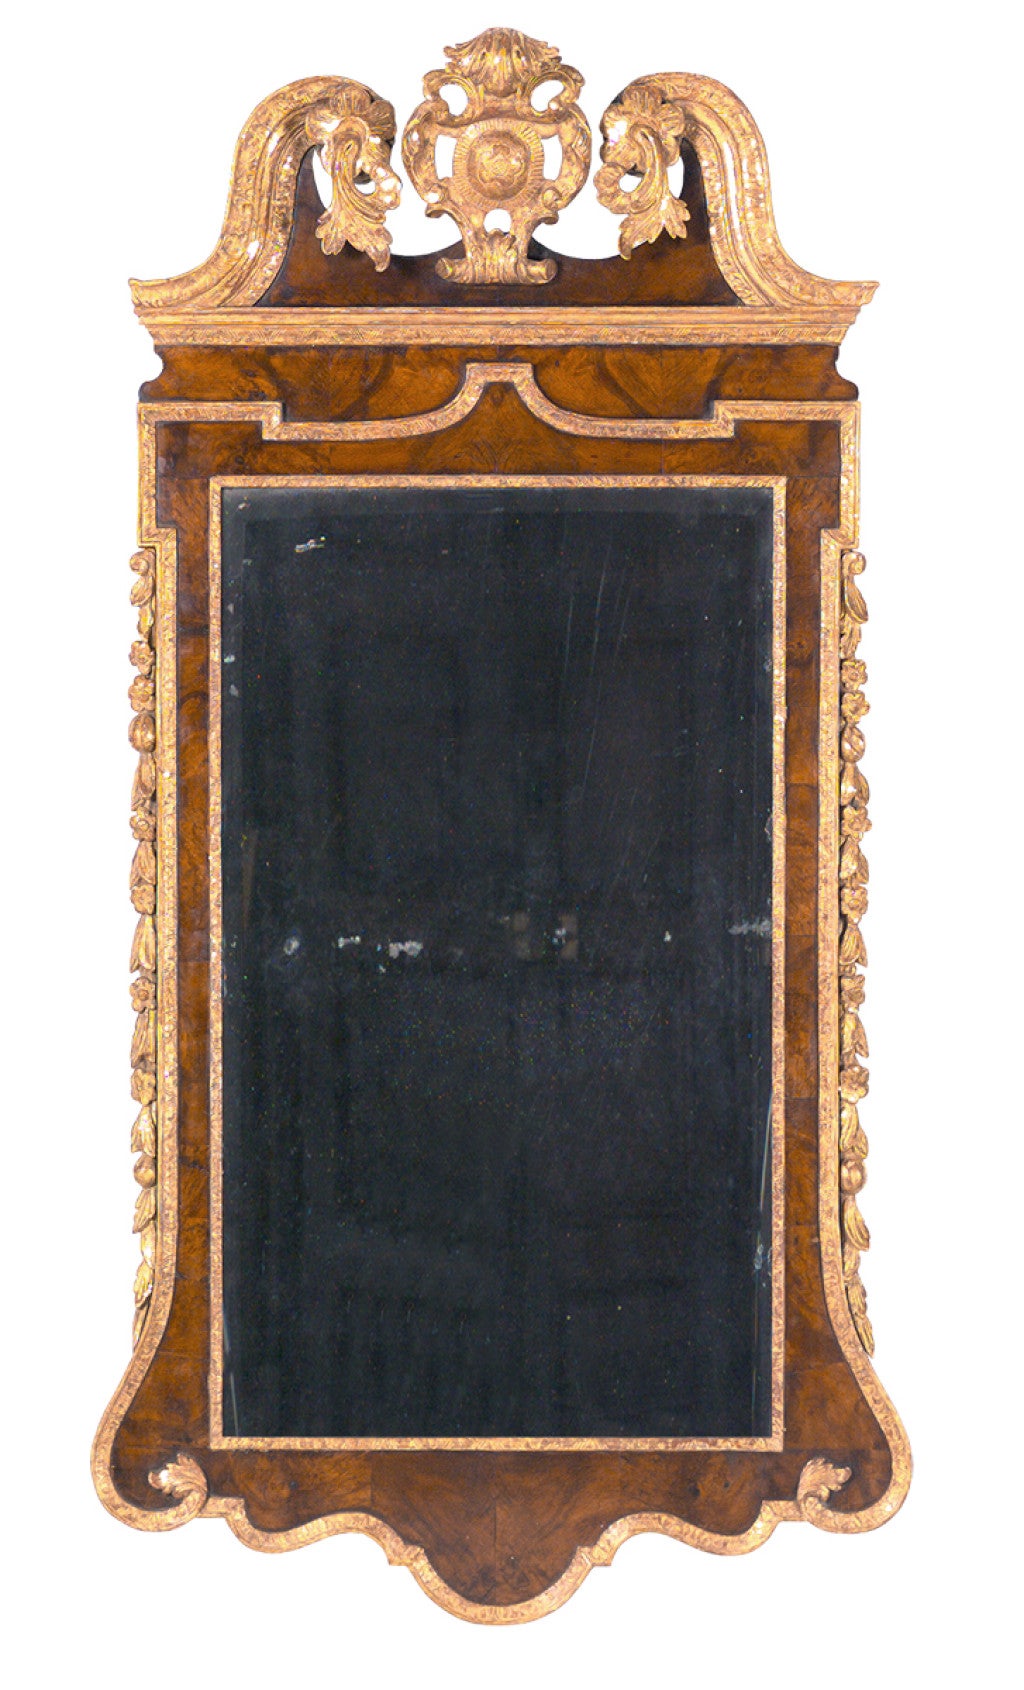 A large walnut veneered and parcel gilt mirror. The swan neck pediment is centered by a shield cartouche. With the original, beveled mirror plate.